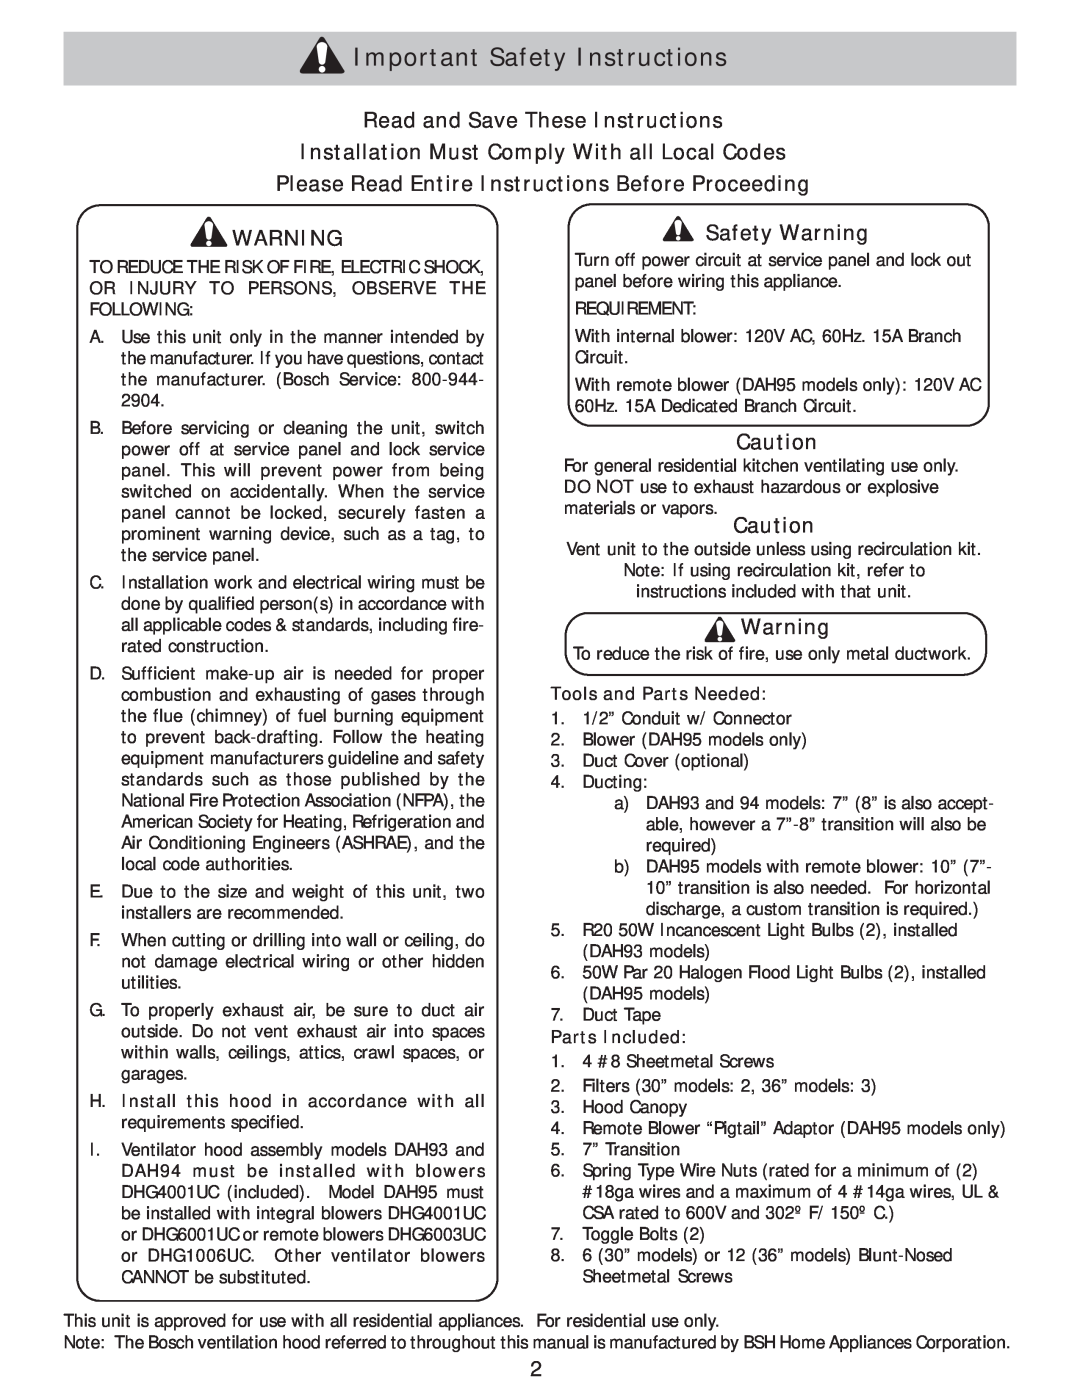 Bosch Appliances DAH94, DAH95, DAH93 Important Safety Instructions, Read and Save These Instructions, Safety Warning 